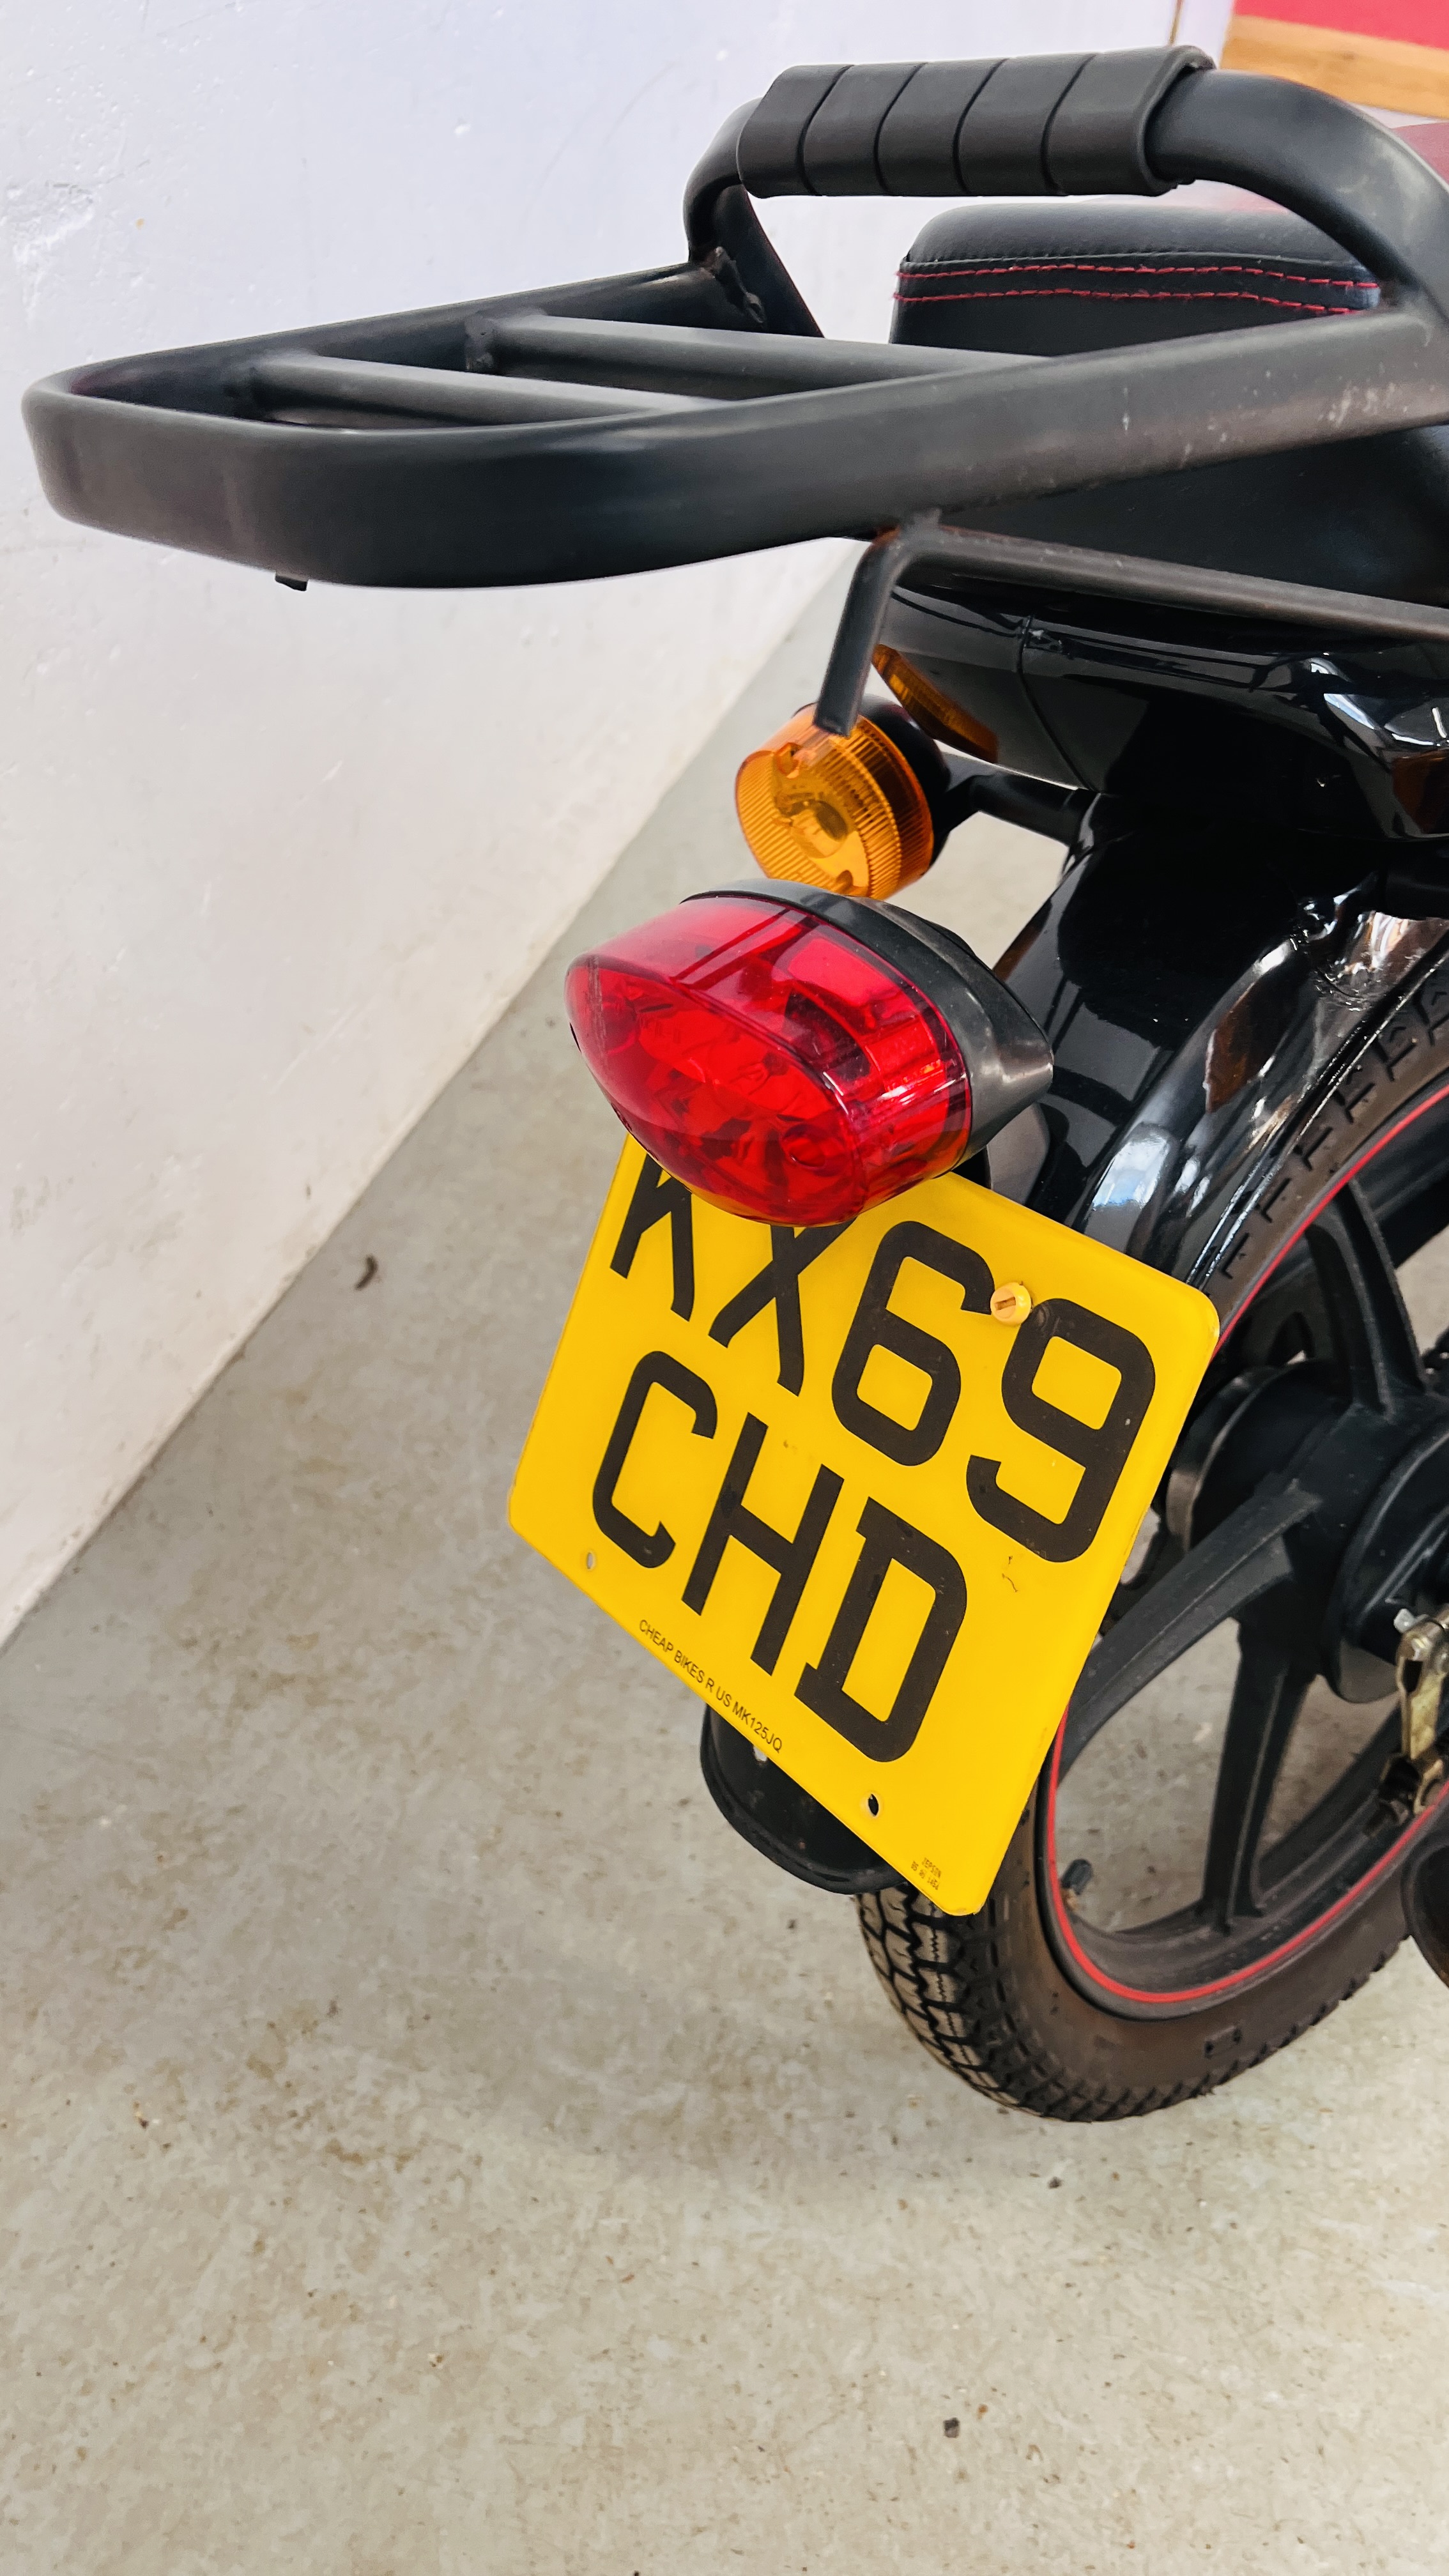 CHAMP 48CC MOTOR CYCLE. VRM - KX69 CHD. FIRST REGISTERED: 01/10/2019. MOT EXPIRED: 30/09/2022. - Image 12 of 22